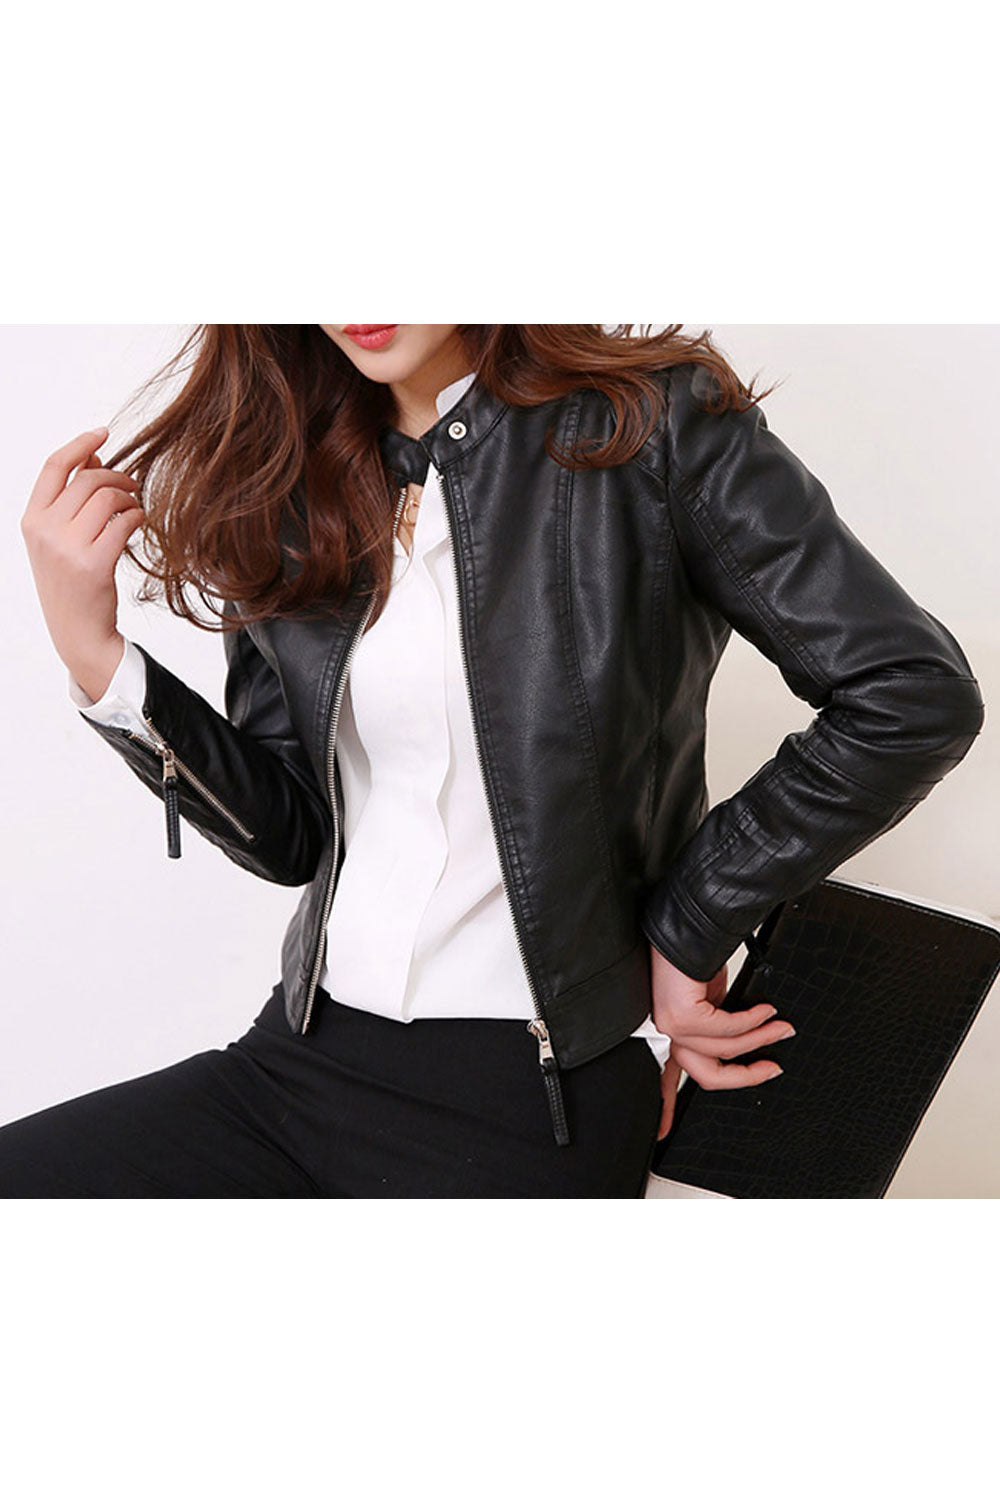 Women Relaxed Fit Thick Long Sleeve Restful Collar Neck Zipper Closure Elegent Solid Colored PU Leather Jacket - WJK89175